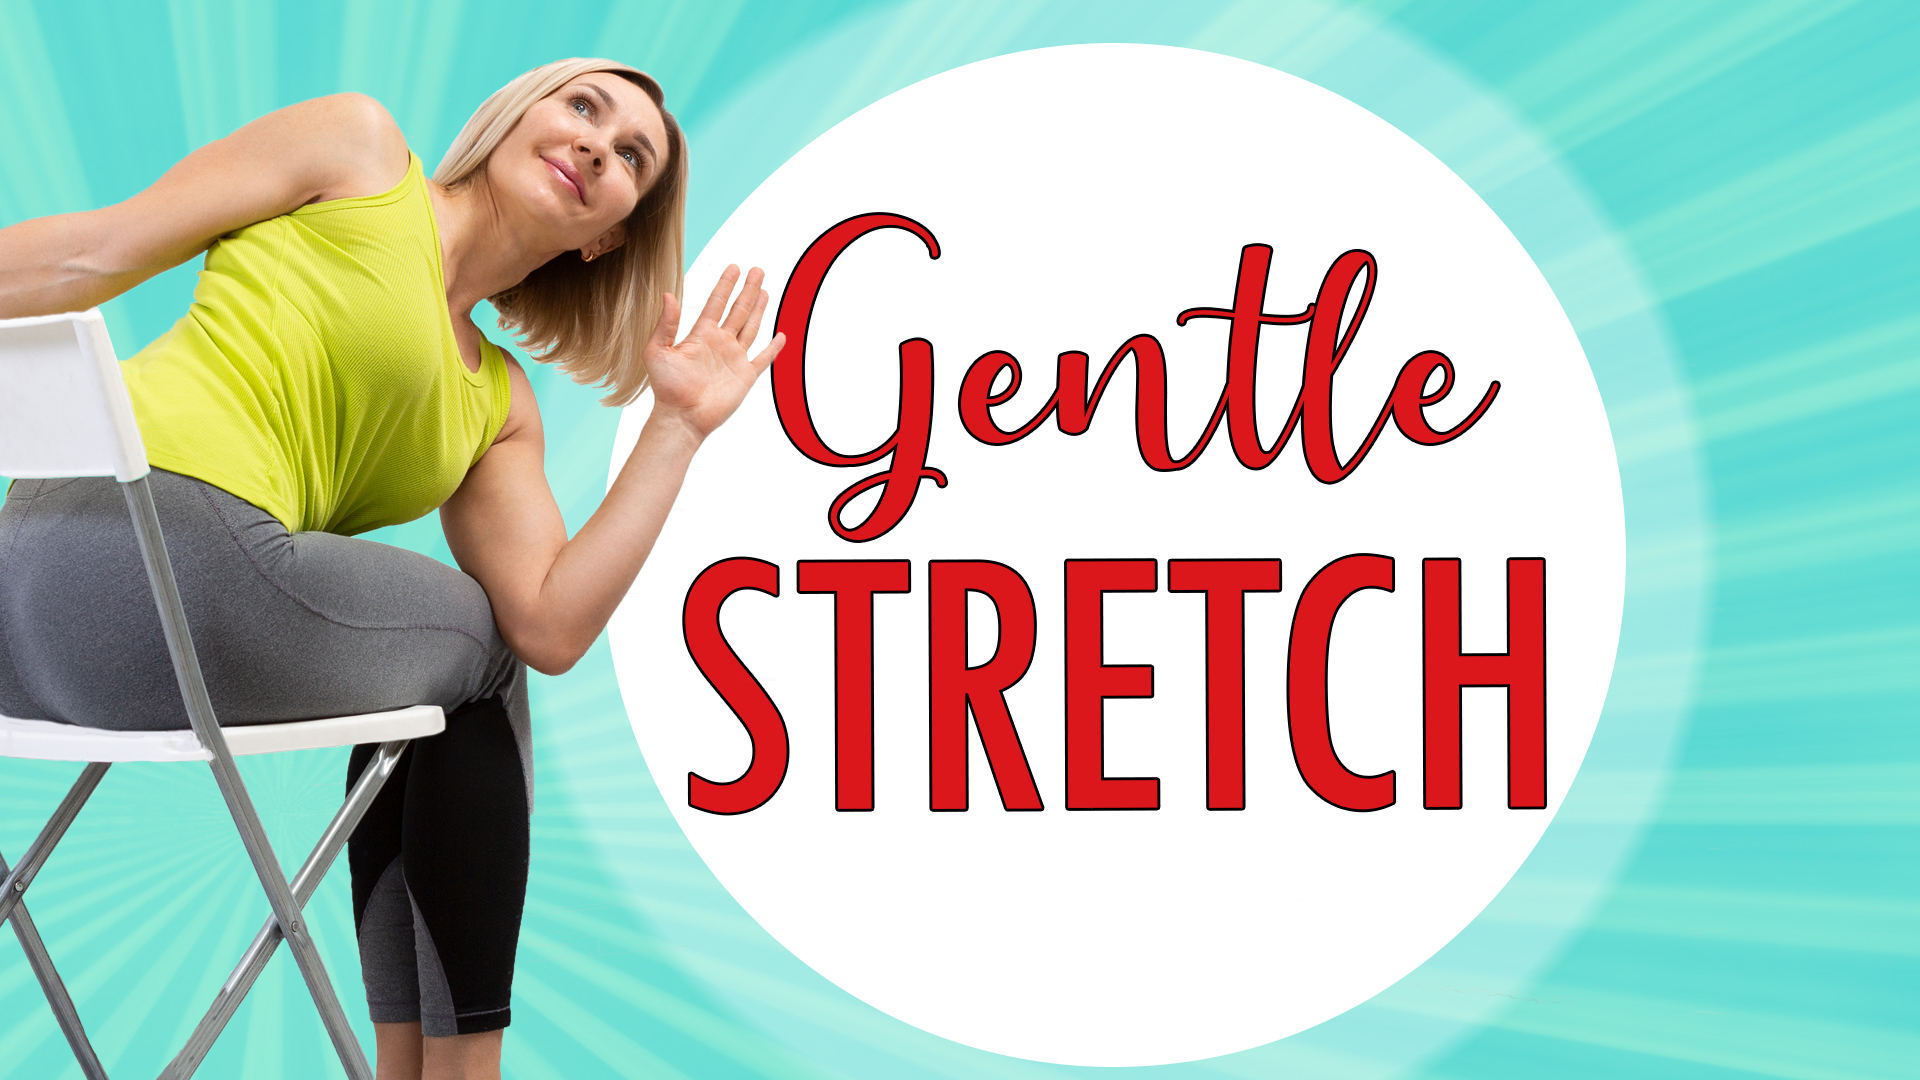 Gentle Stretch graphic depicting a woman doing a chair stretch.